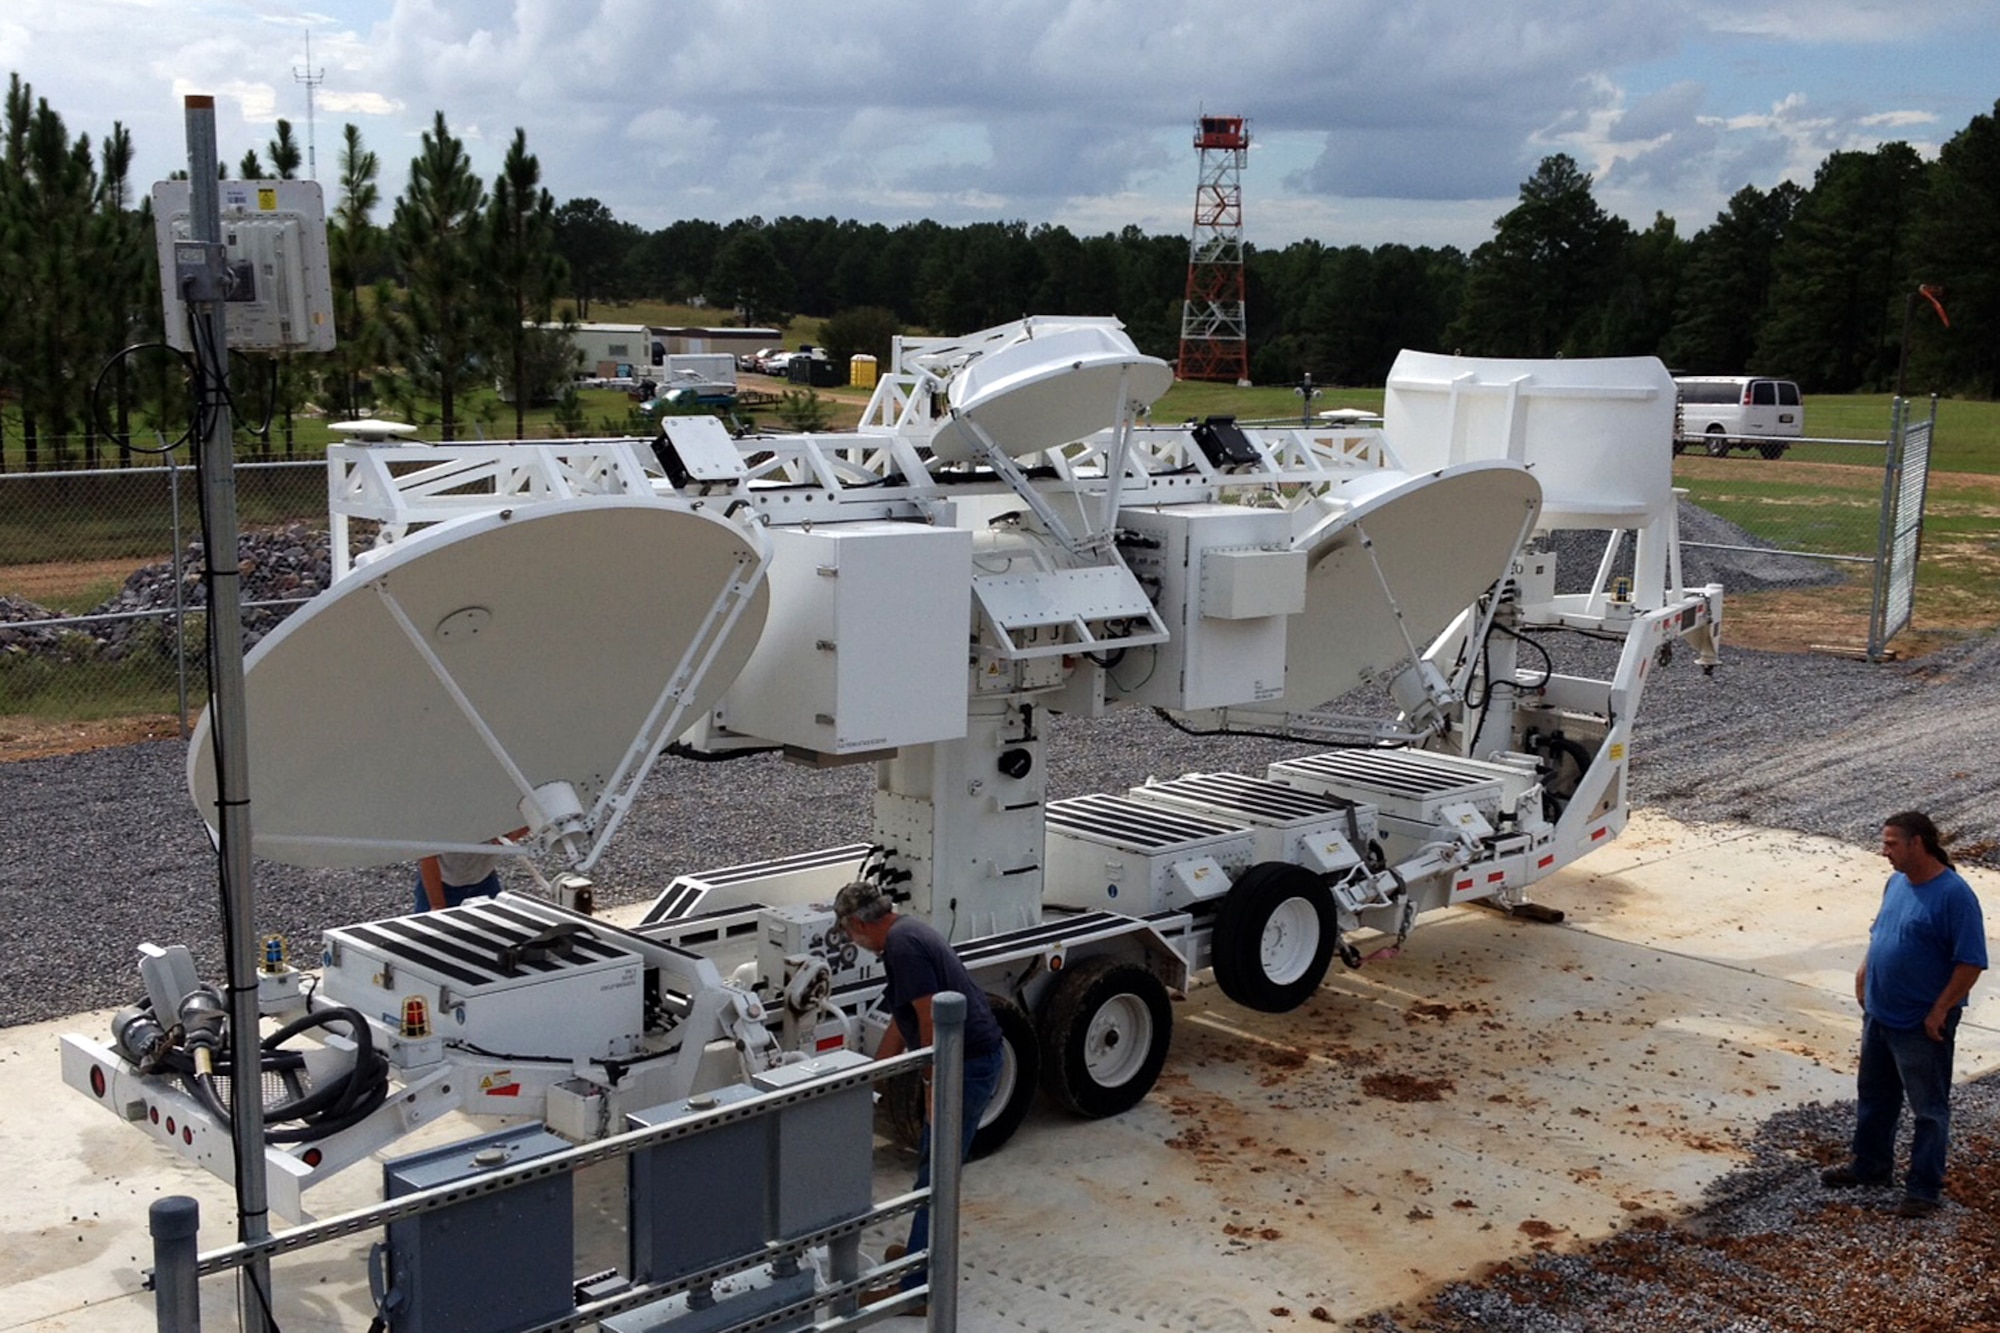 The Transmitter Electronic Unit antenna array is installed at the Claiborne Bombing and Gunnery Range, Oct. 4, 2013, Alexandria, La. The transmitter is part of the Joint Threat Emitter, which simulates surface-to-air missile threats against U.S. Air Force aircraft. (Courtesy photo/released)